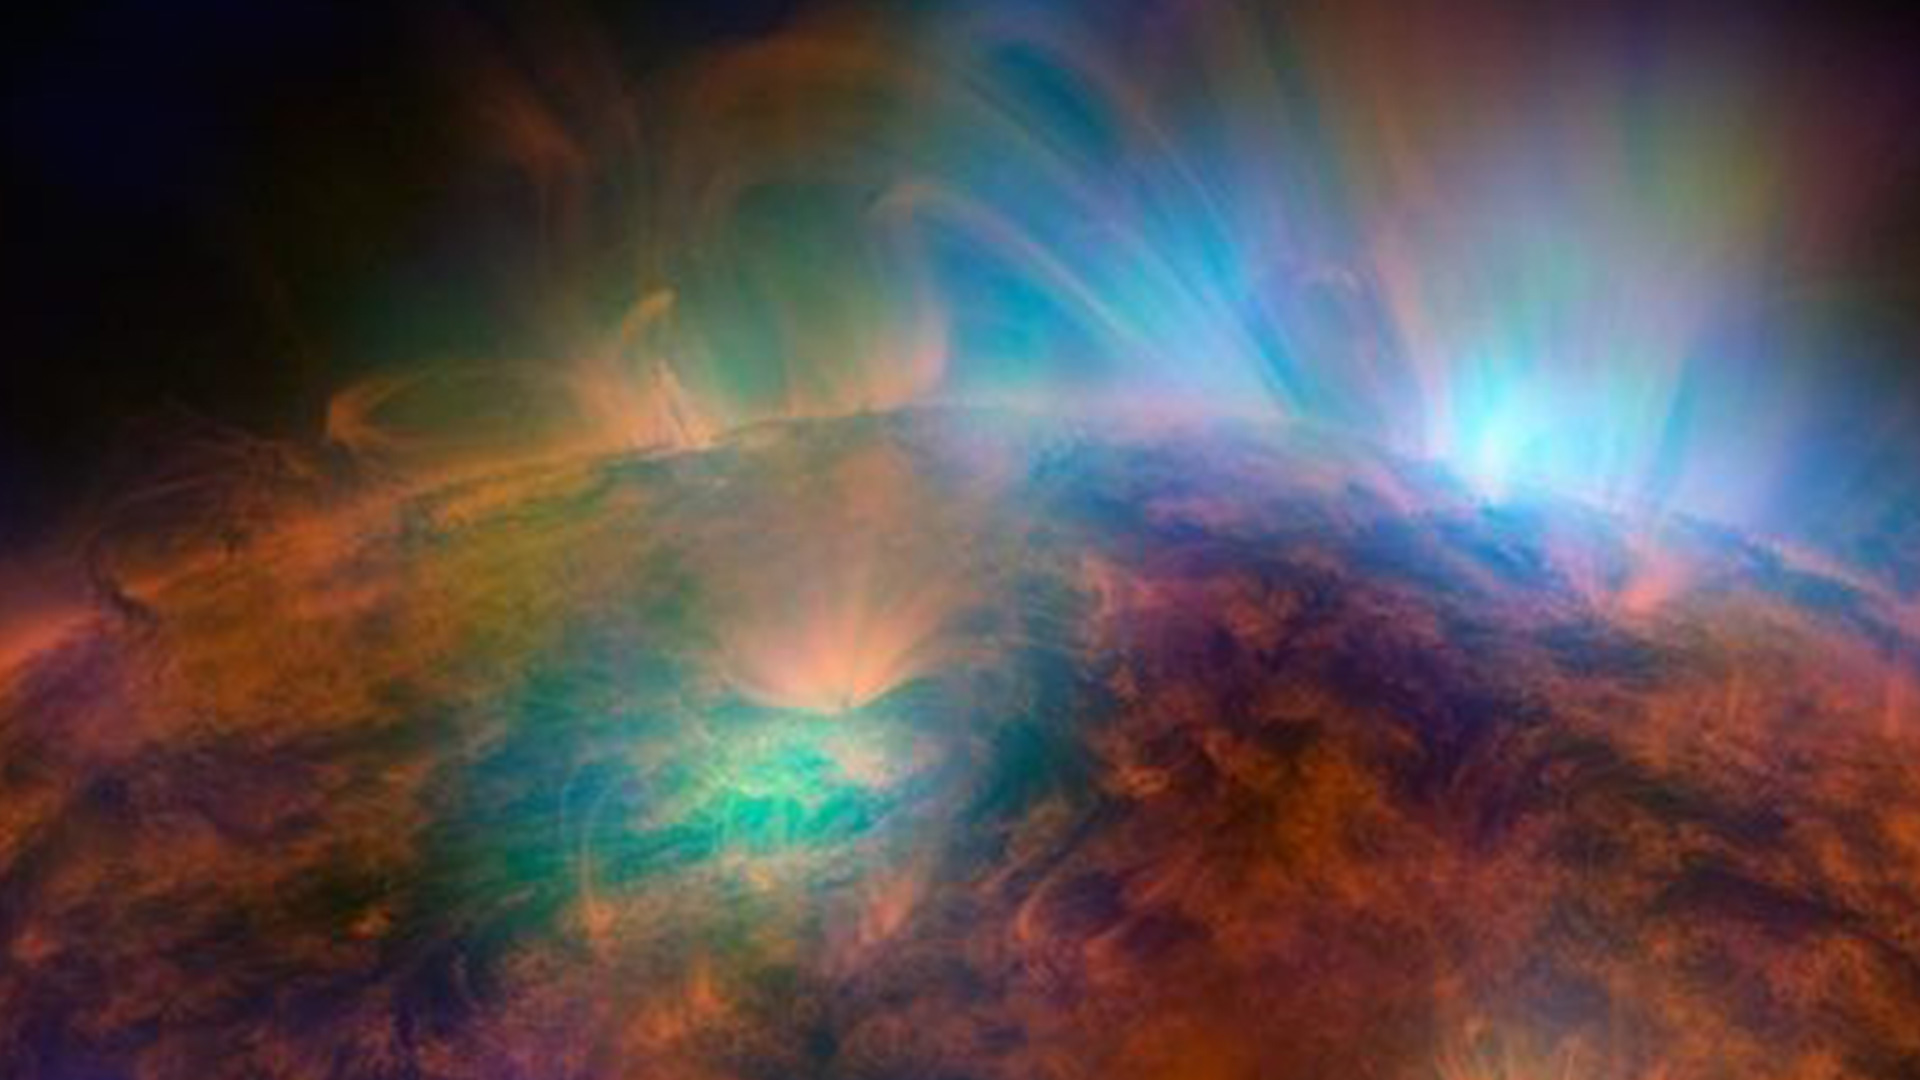 Nasa shows mind-boggling image showing X-rays coming out of the Sun’s surface